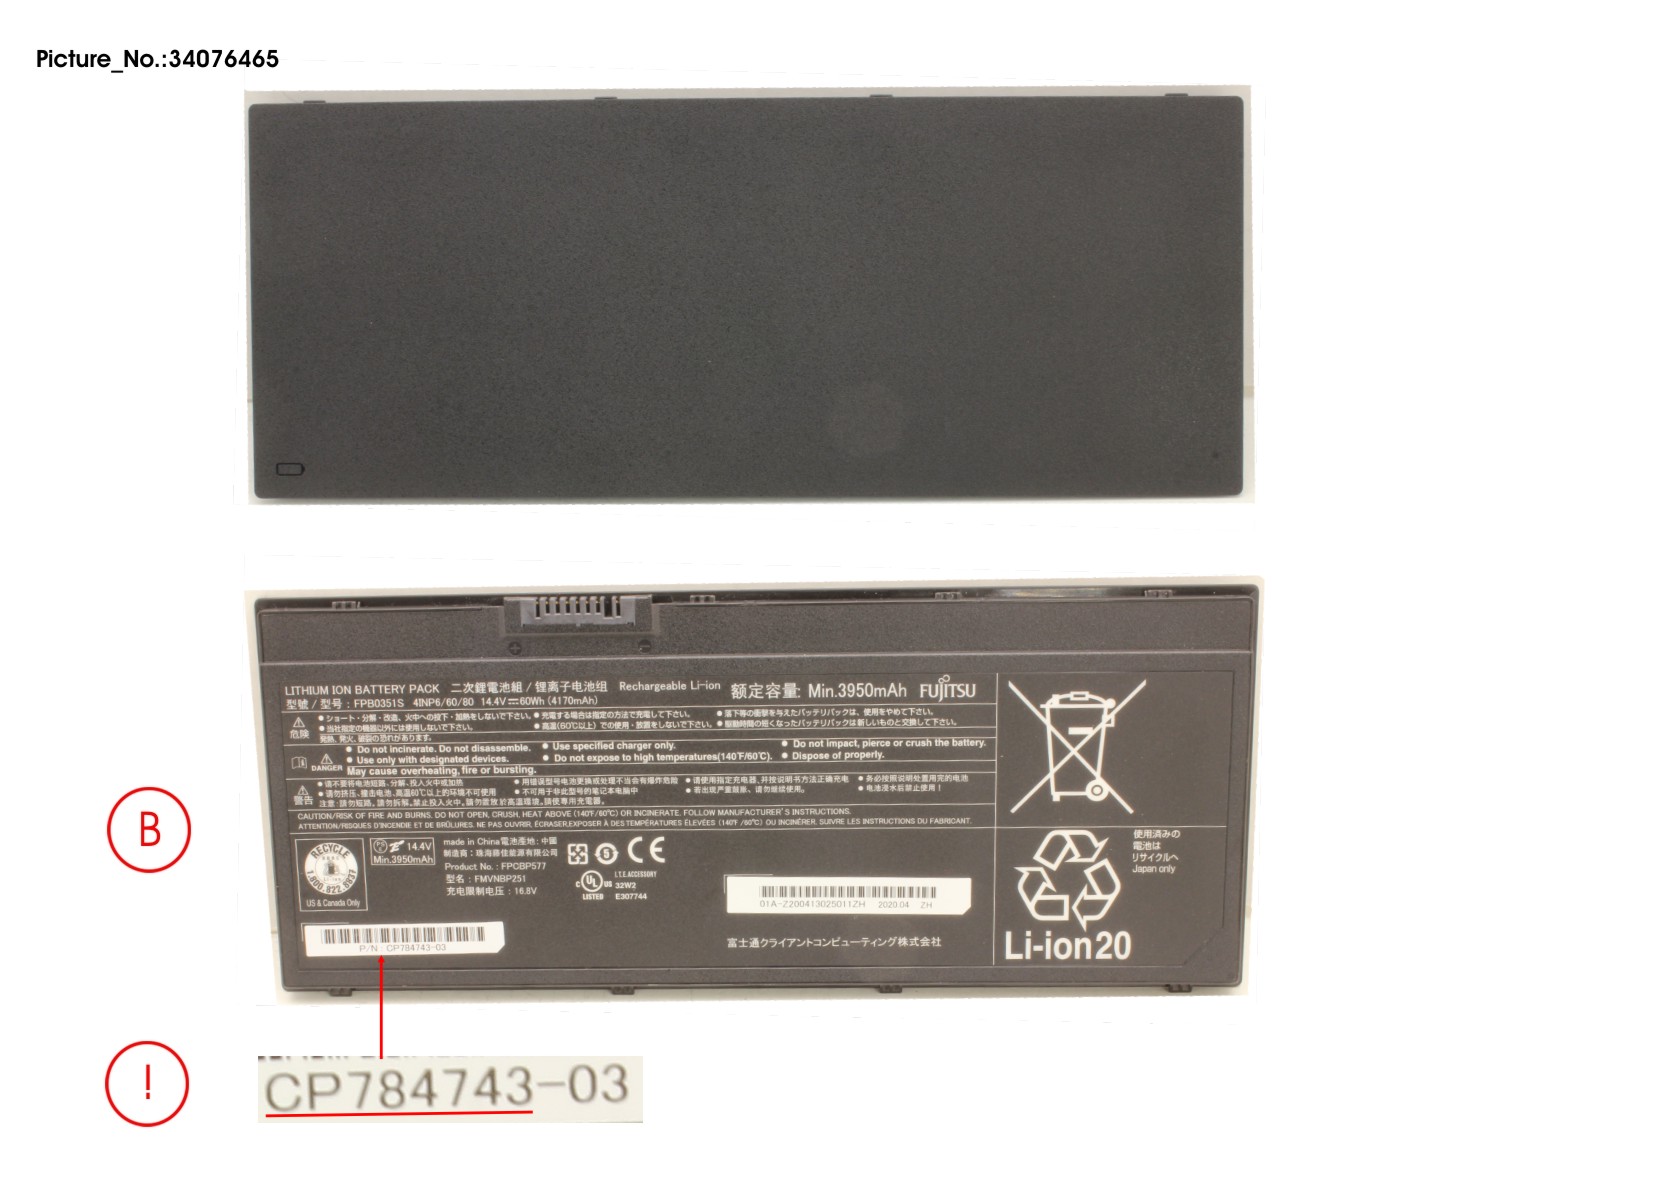 -BT-1ST BATTERY (4 CELL) 4170 MAH 60 WH